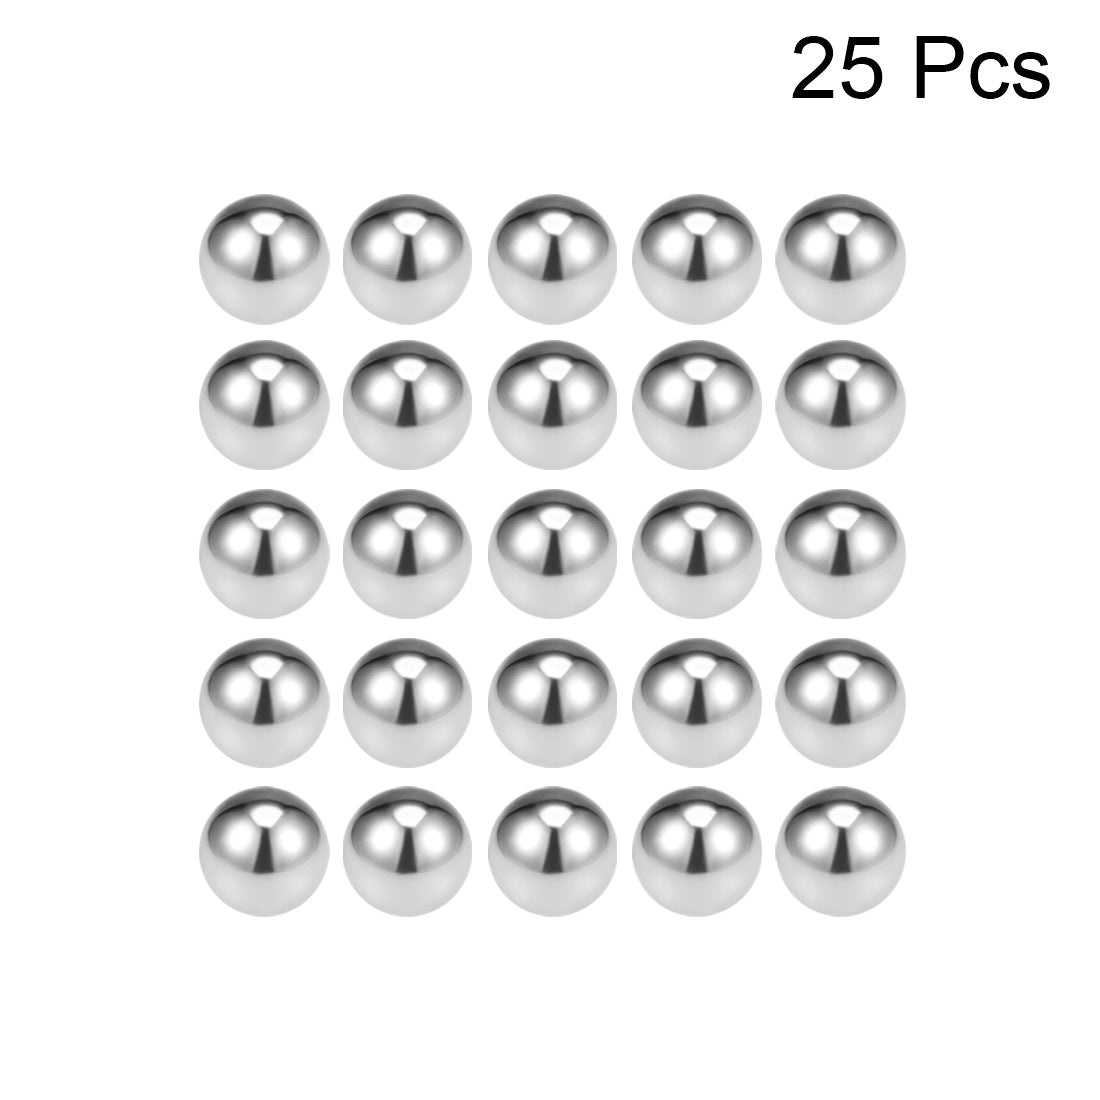 Uxcell Uxcell 3/8-inch Bearing Balls 304 Stainless Steel G100 Precision Balls 25pcs